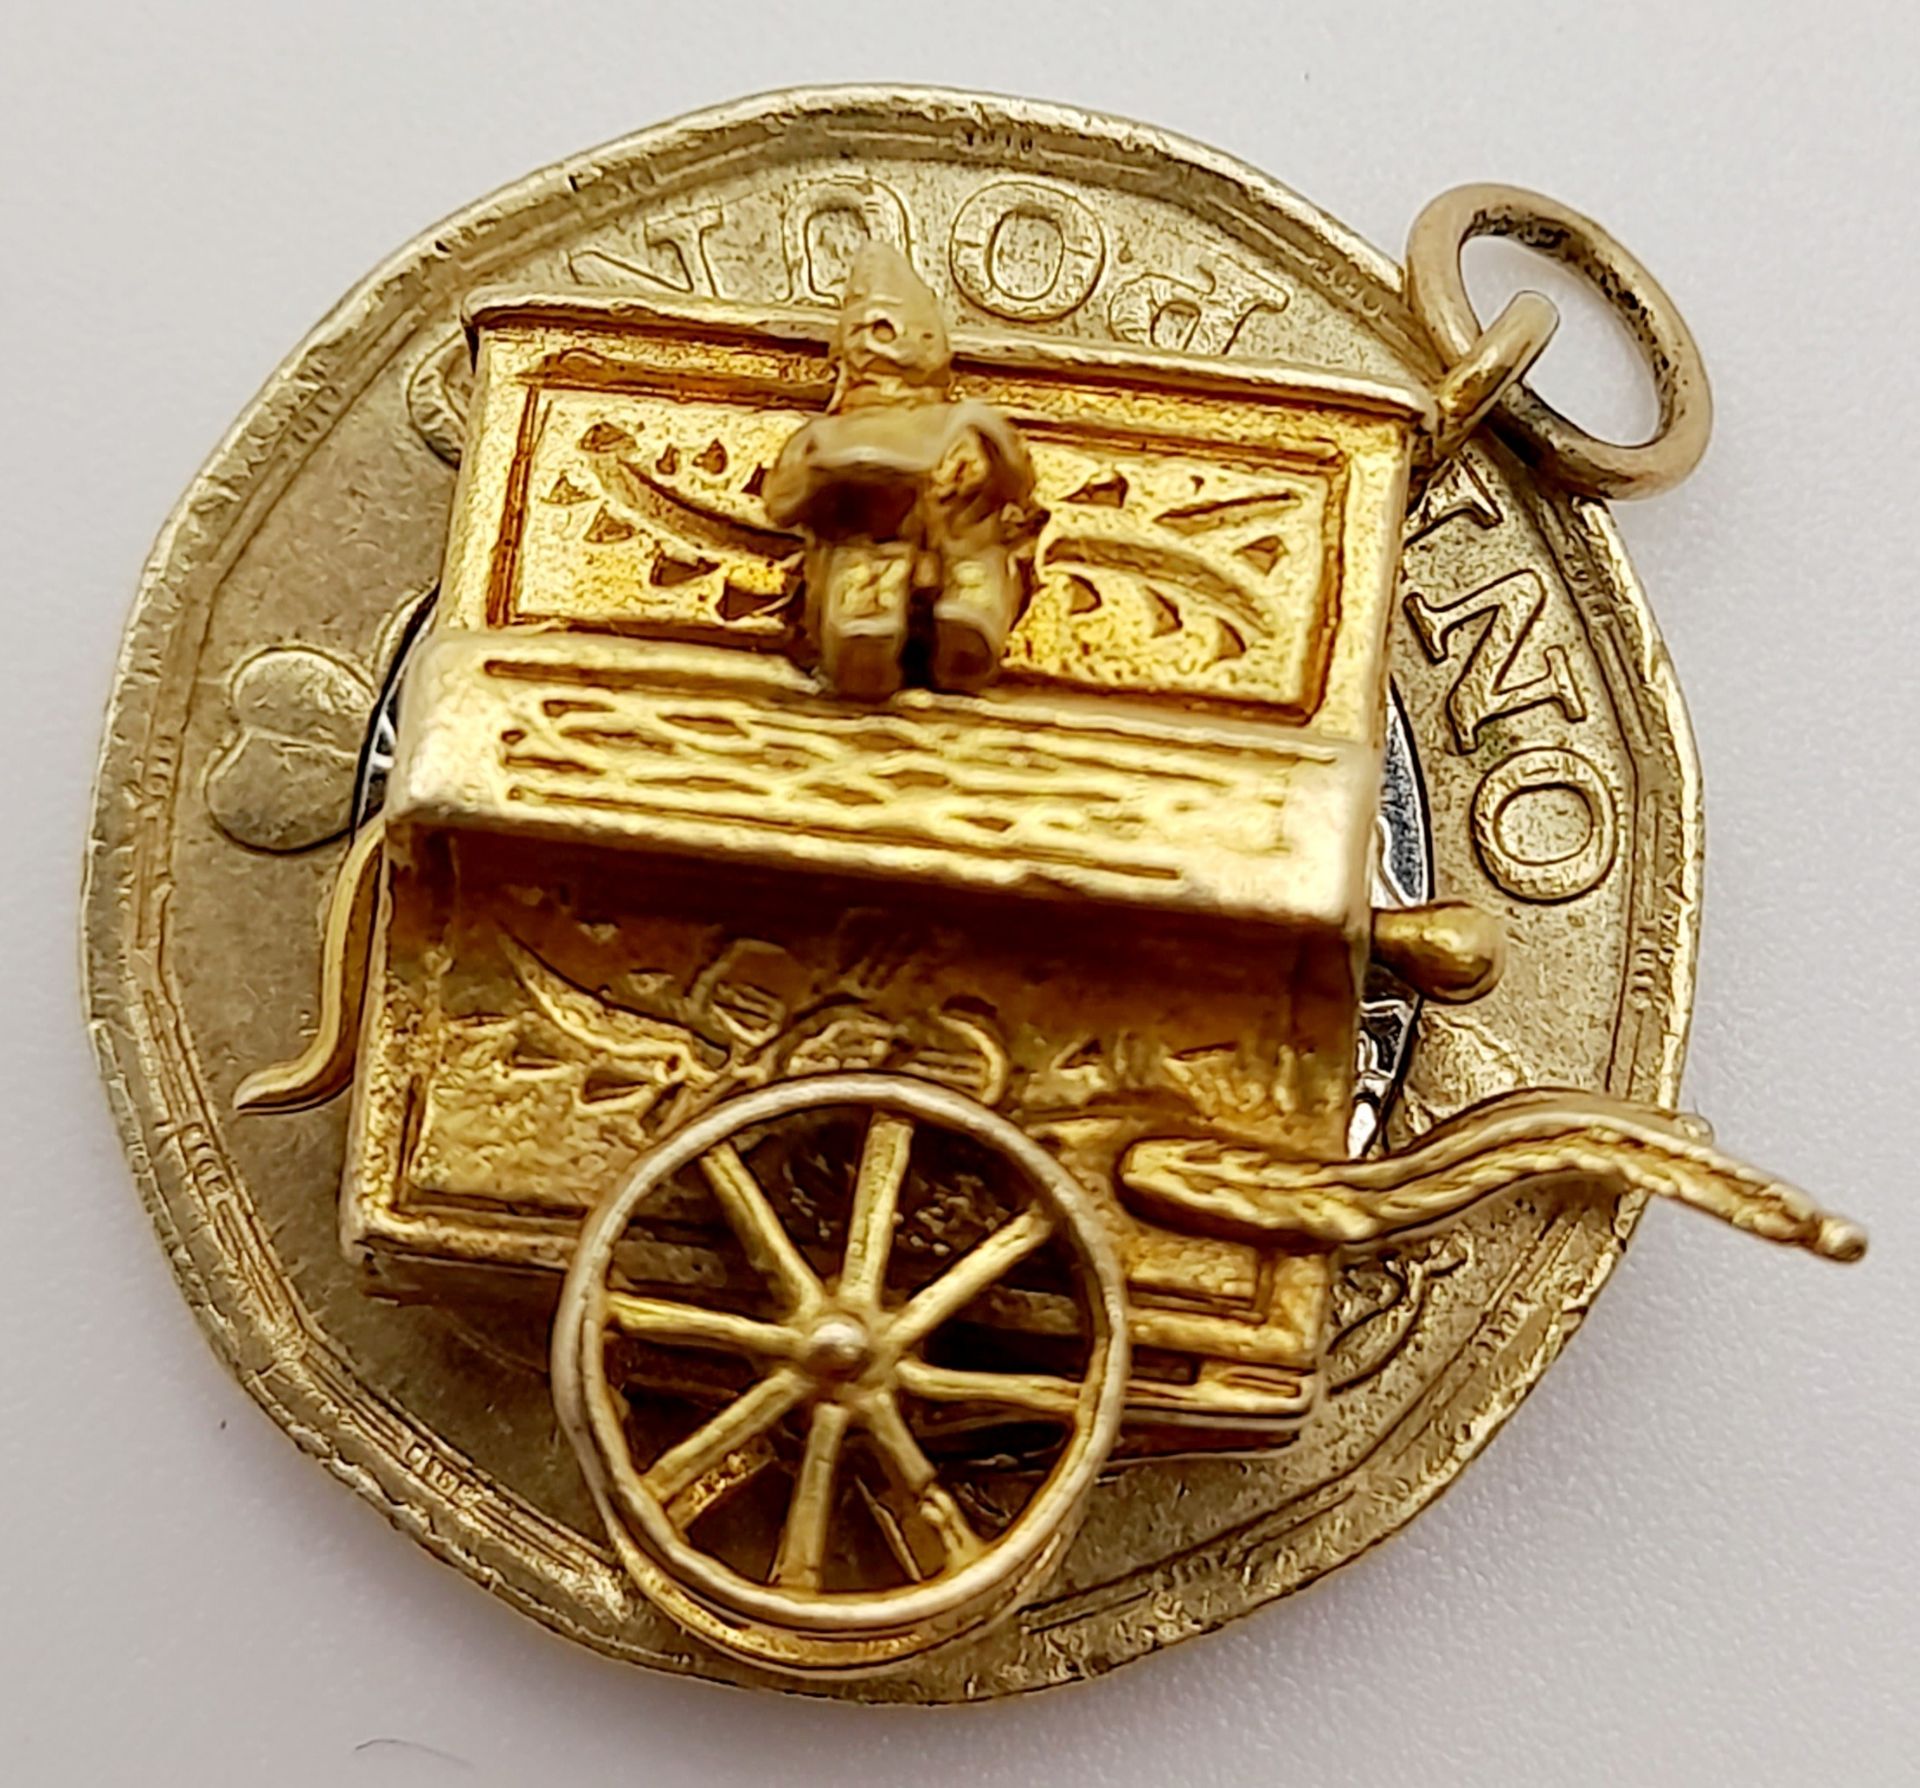 A 9K YELLOW GOLD ORGAN GRINDER AND MONKEY CHARM WITH MOVING PARTS. 2.2cm x 2.5cm, 5.2g weight. - Bild 5 aus 6